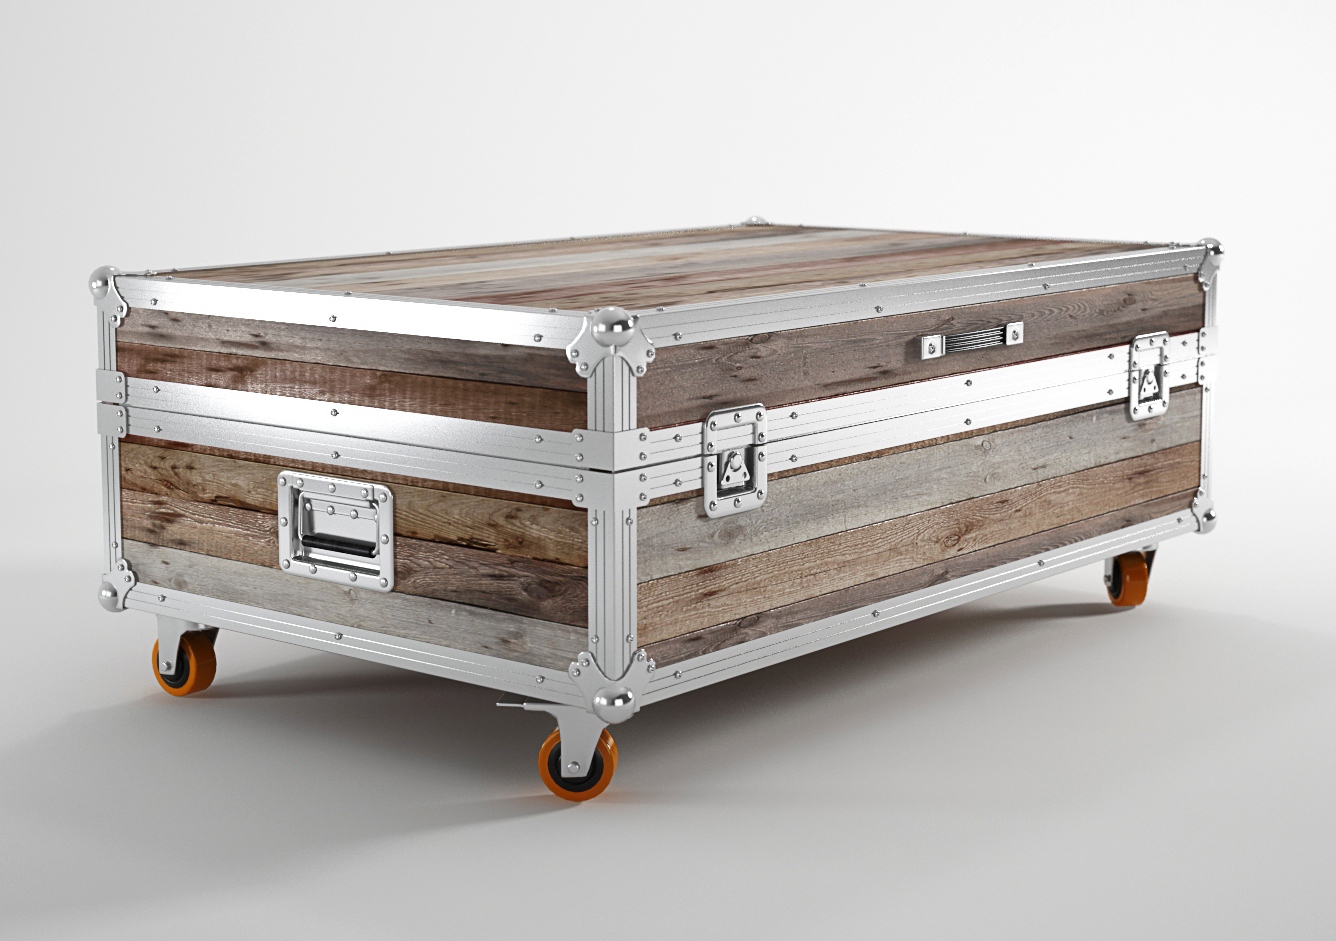 Chest Coffee Table With Wheels, Storage Trunk Coffee Table On Wheels